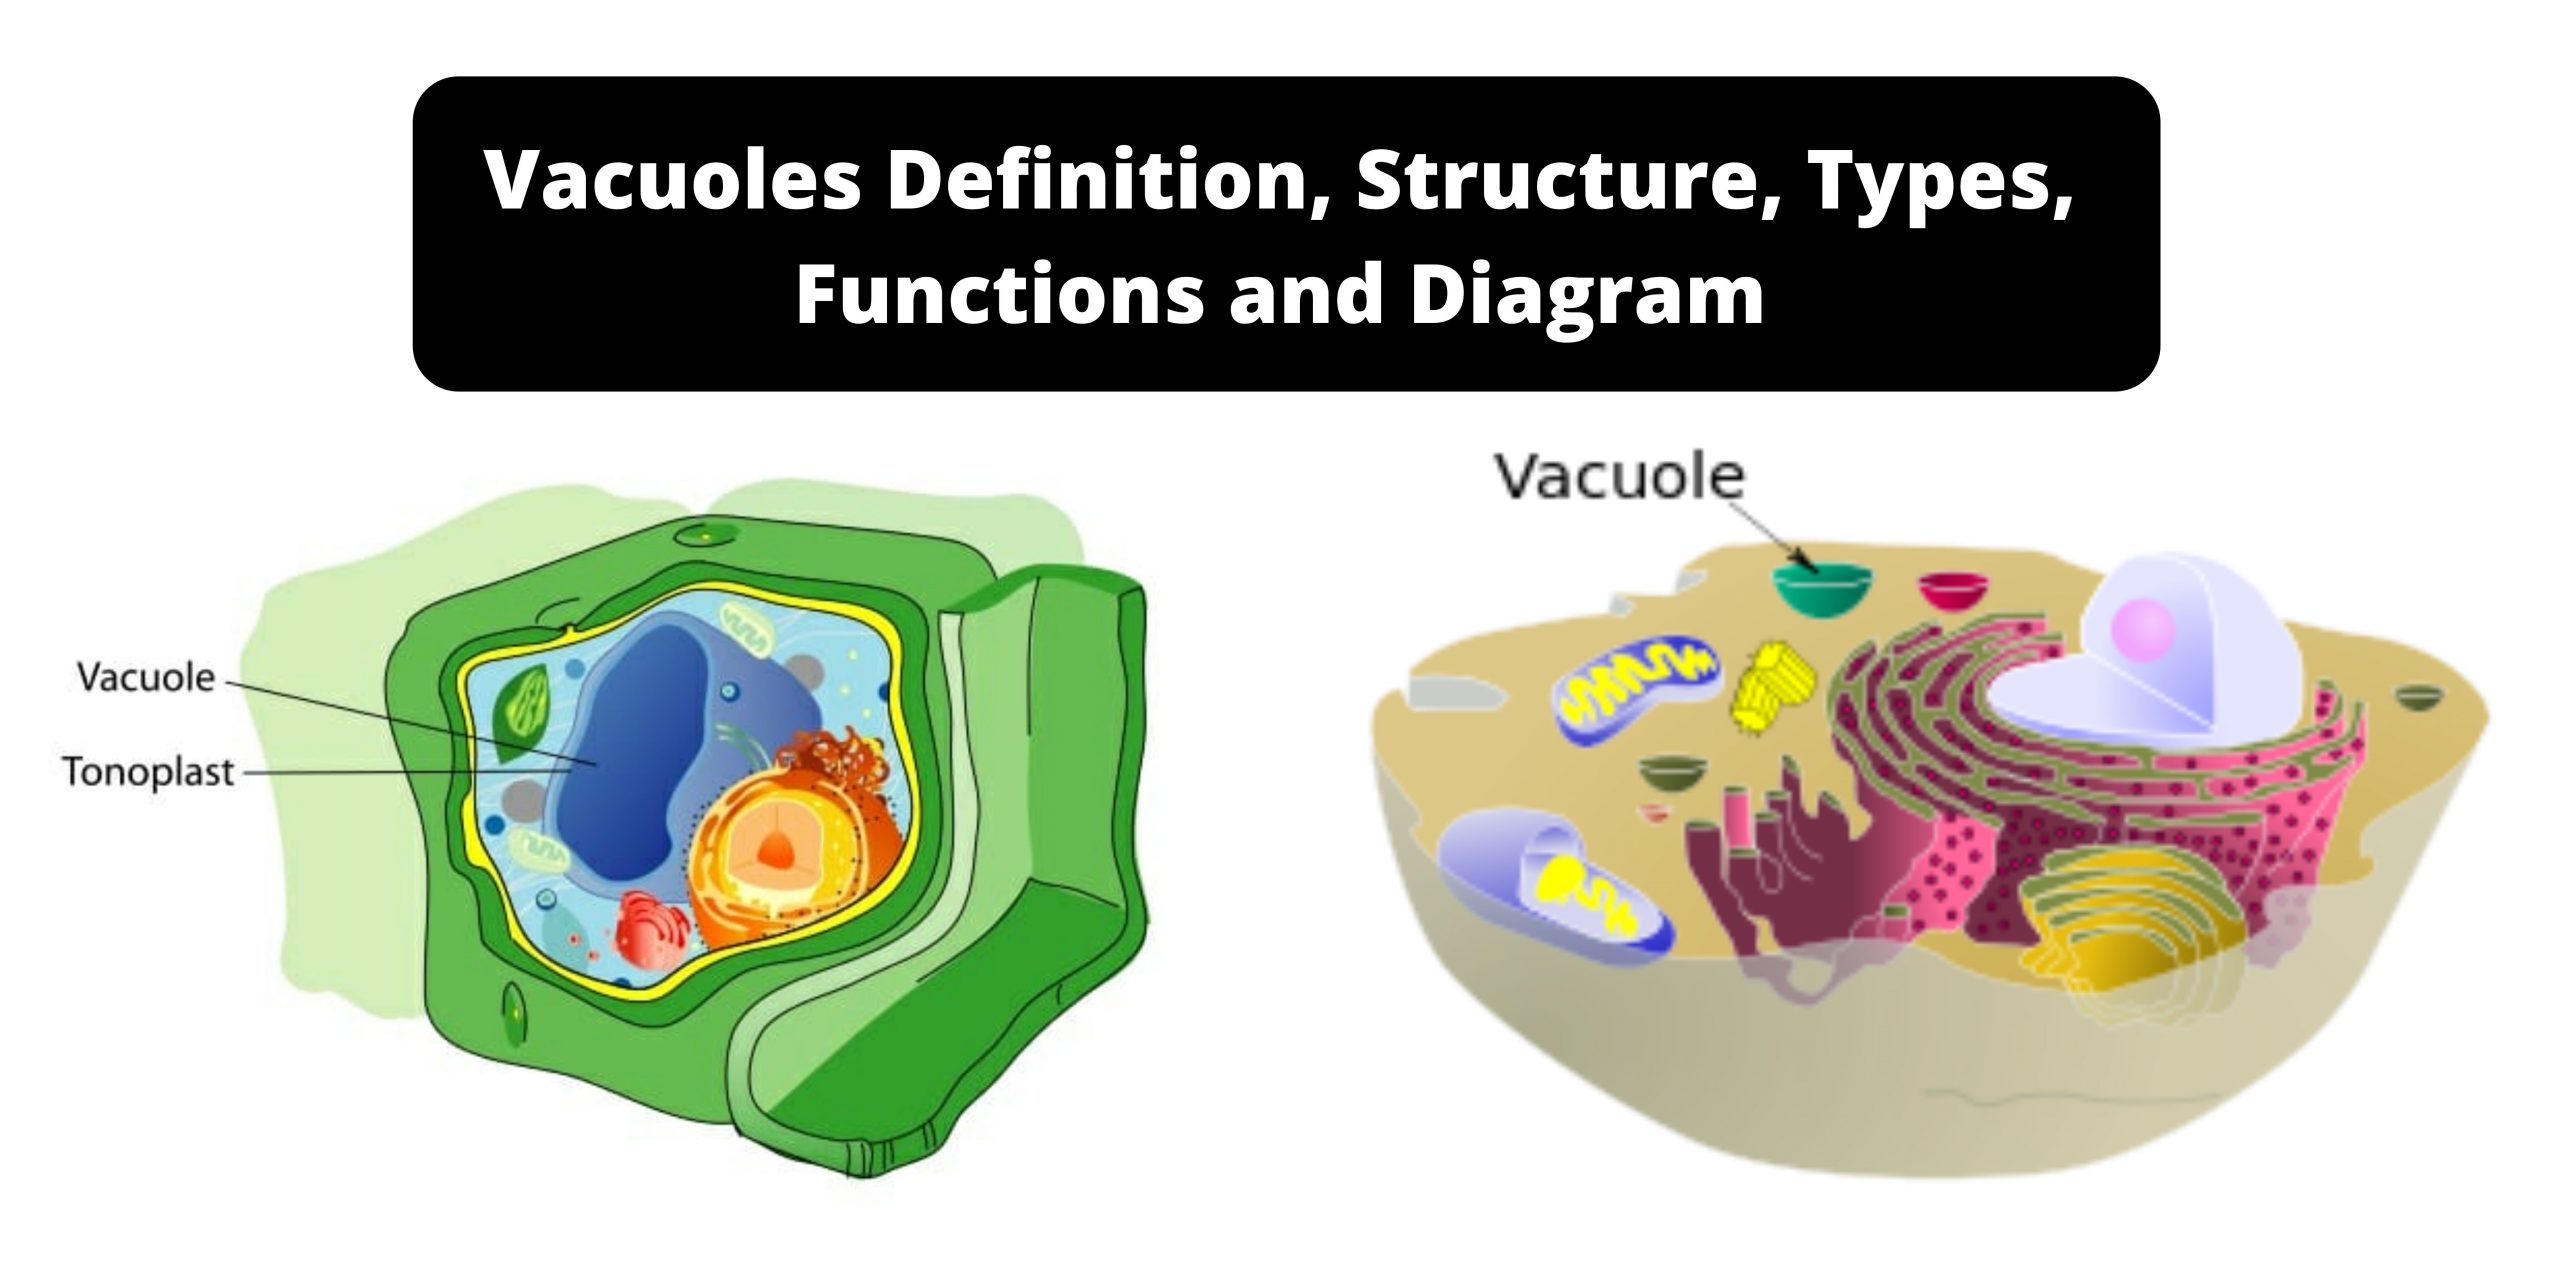 Vacuoles Definition, Structure, Types, Functions, And Diagram